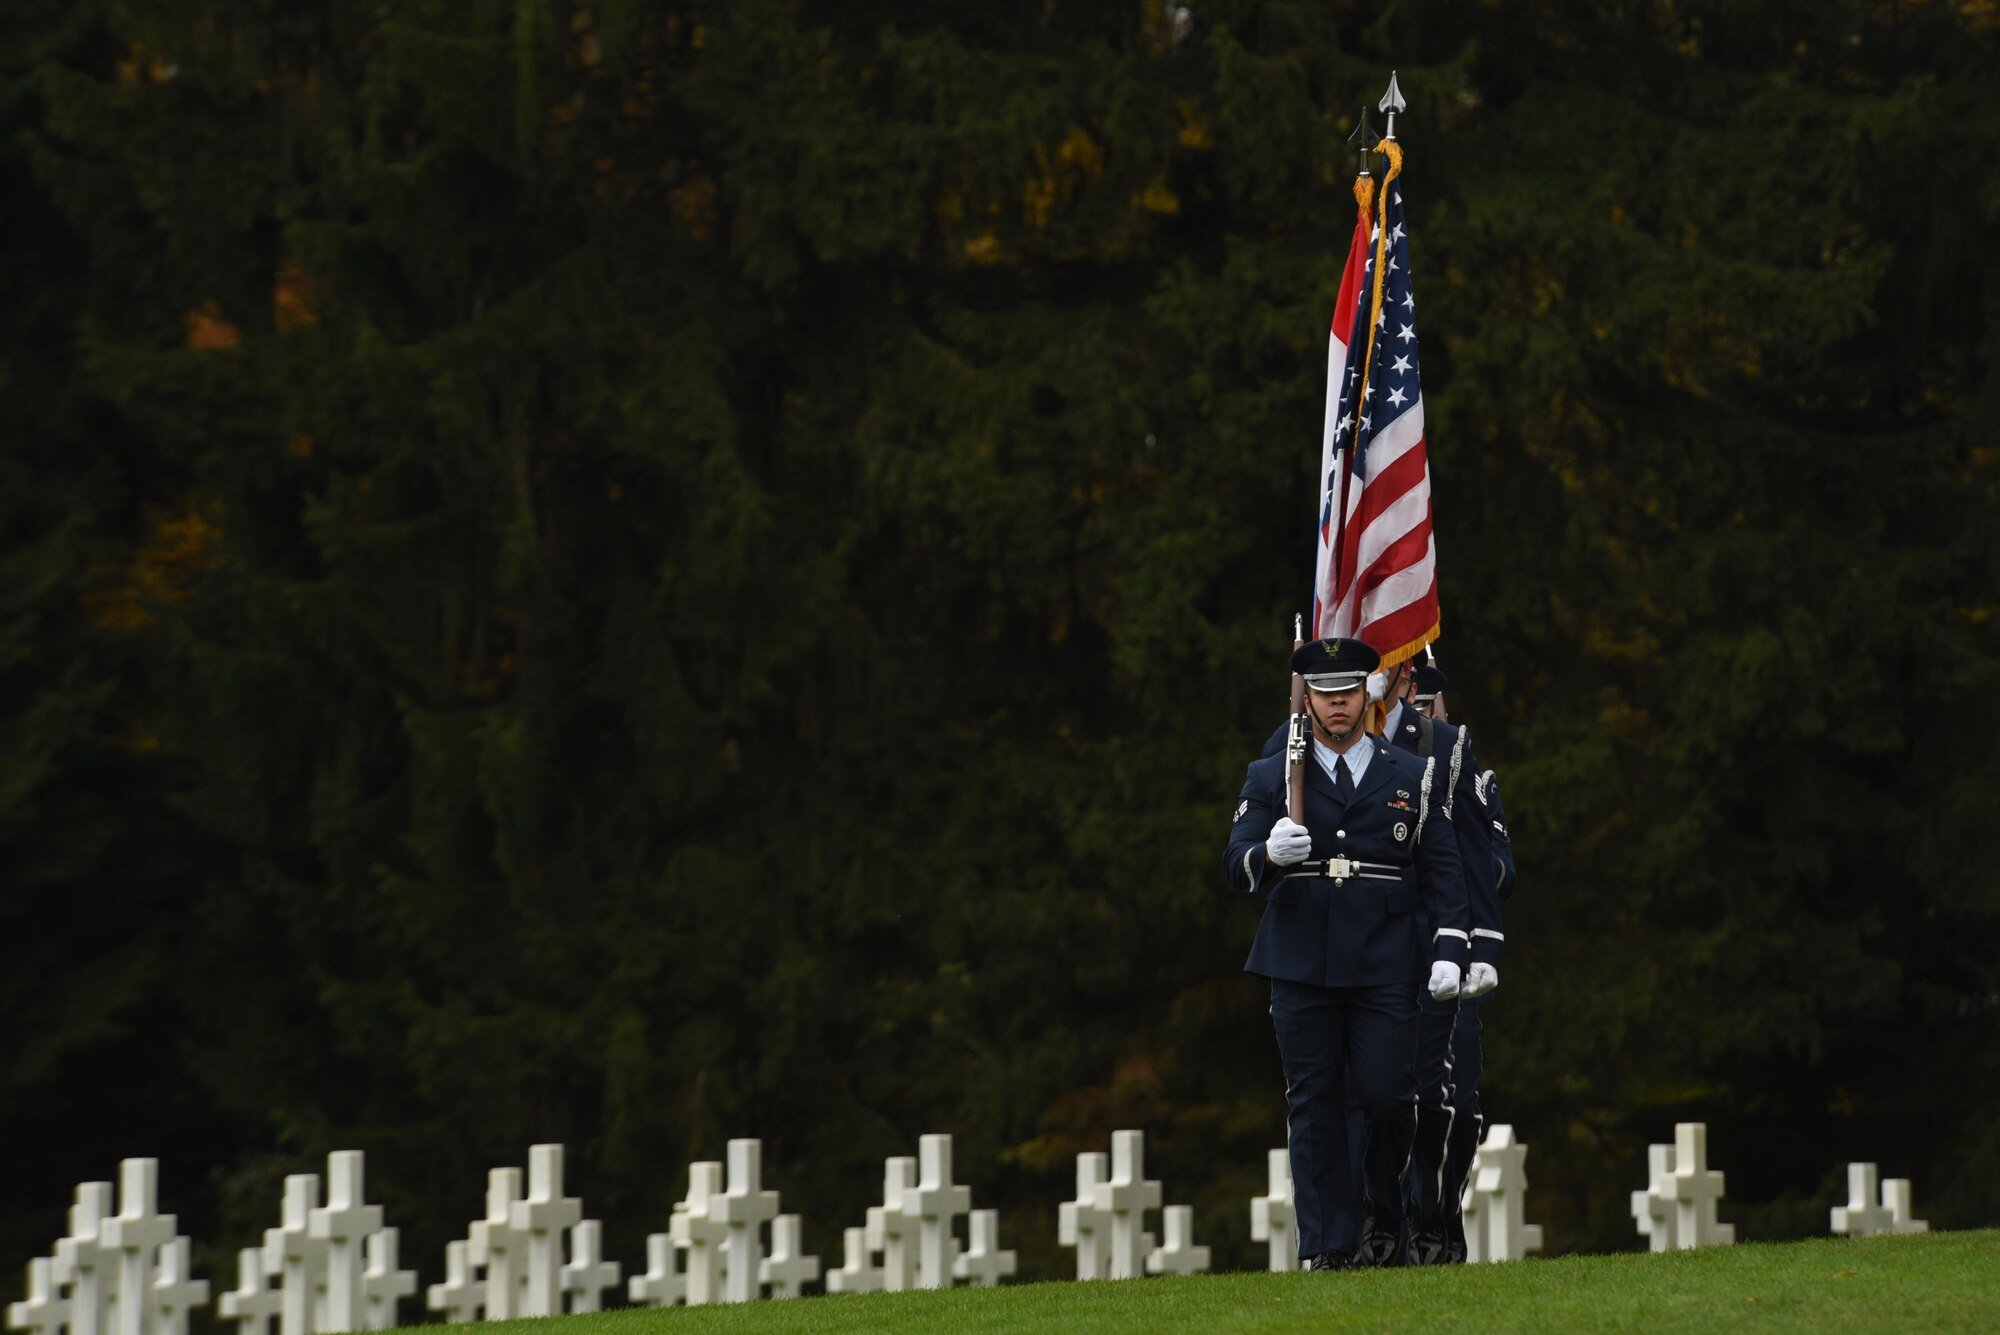 Ceremonial guardsmen from the 52nd Fighter Wing, Spangdahlem Air Base, Germany, march while carrying the Luxembourg and American flags during a Memorial Day ceremony at the Luxembourg American Military Cemetery and Memorial in Luxembourg, Nov. 11, 2016. The ceremony paid tribute to the legacy of service of members of the American armed forces. (U.S. Air Force photo by Staff Sgt. Joe W. McFadden)